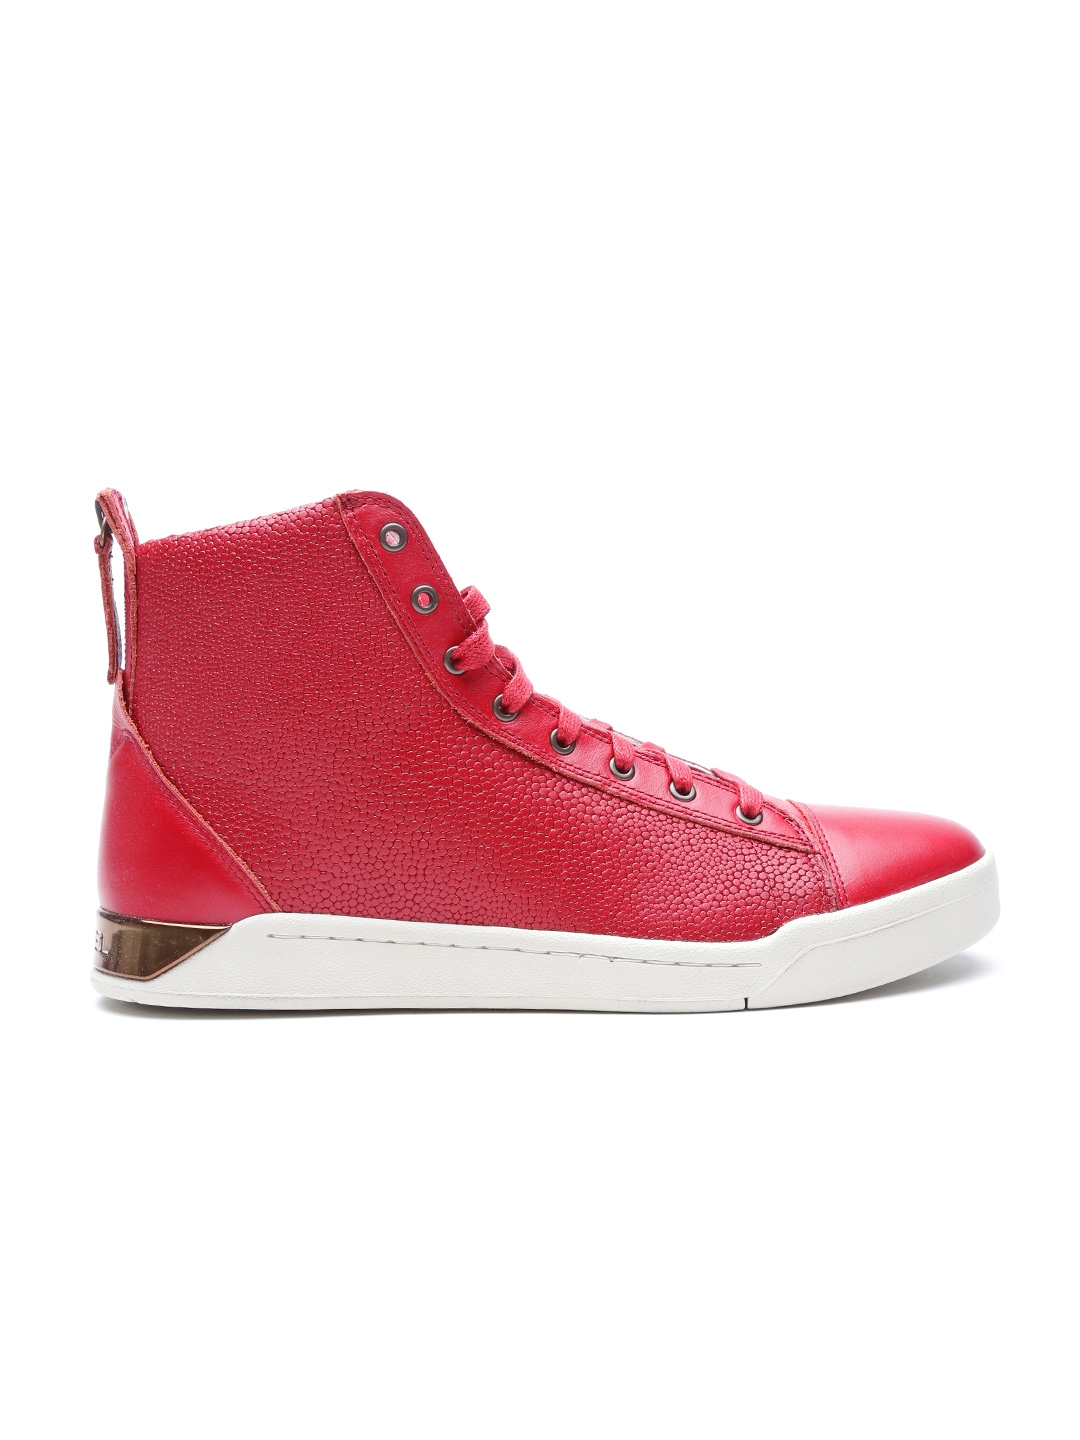 Buy DIESEL Men Red High Top Leather Sneakers - Casual Shoes for Men ...